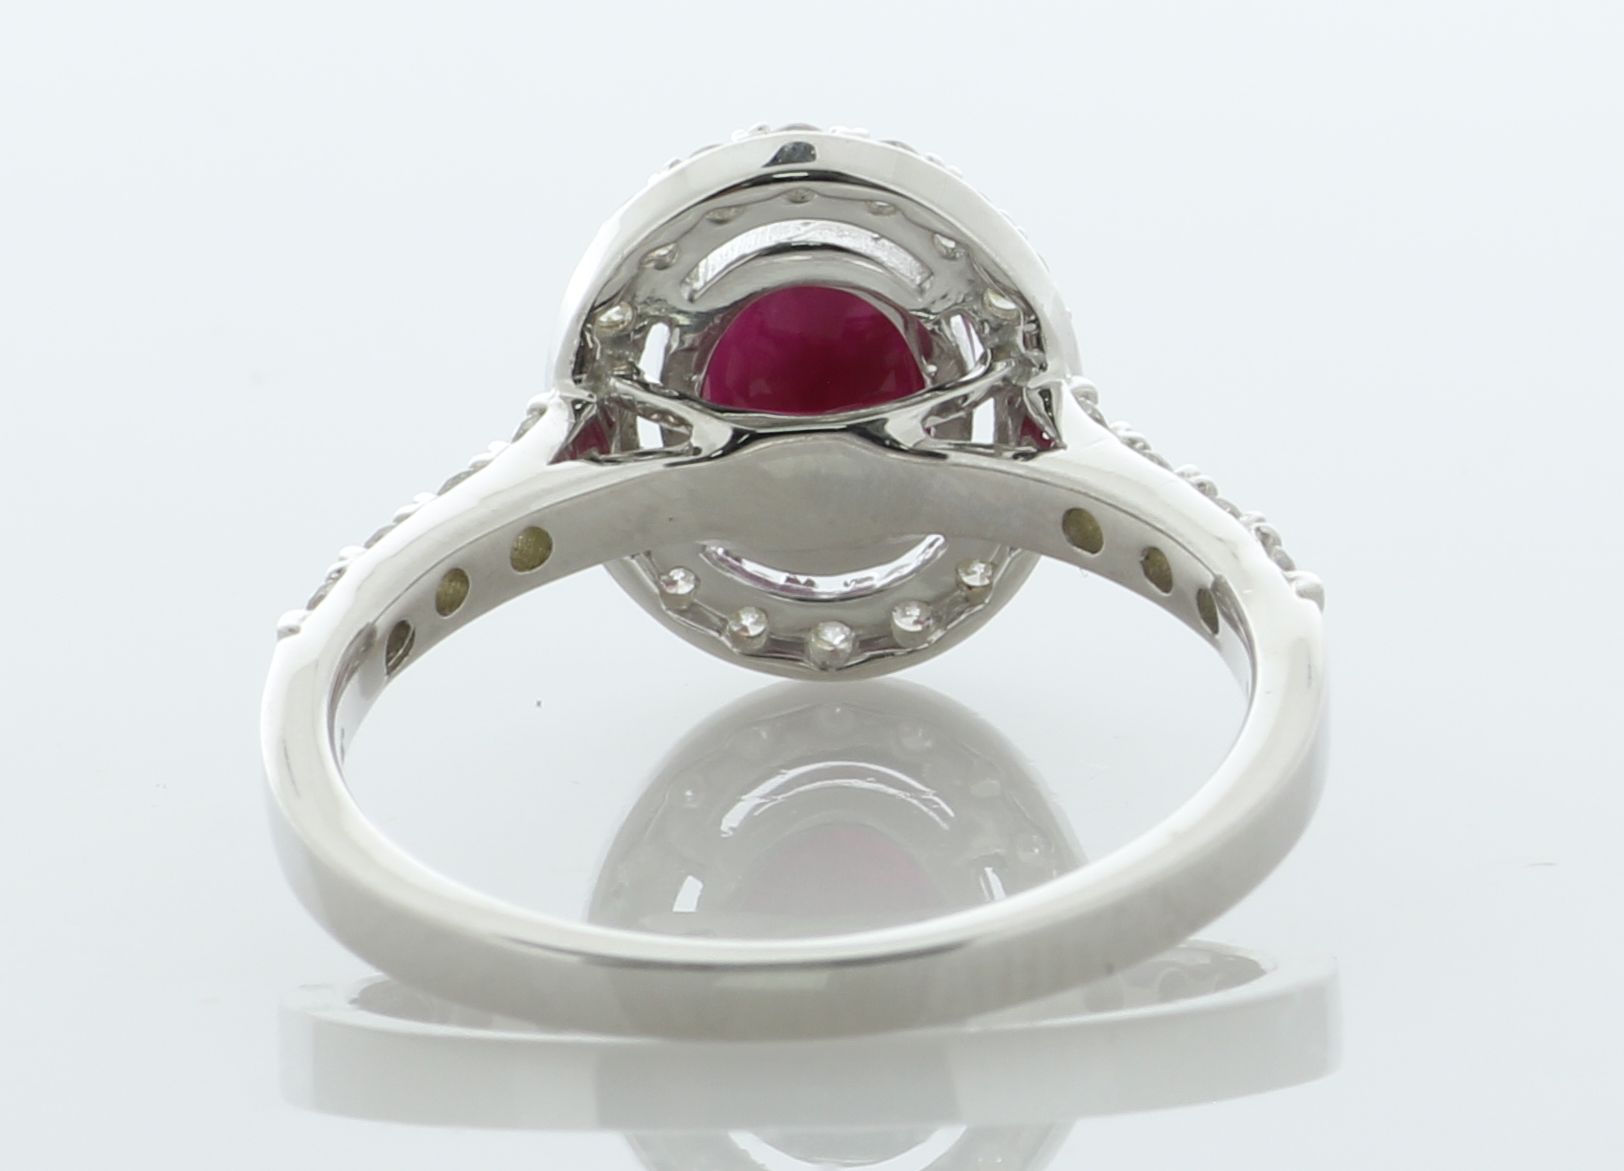 18ct White Gold Ladies Cluster Diamond And Ruby Ring (R2.00) 0.65 Carats - Valued By AGI £6,950.00 - - Image 4 of 5